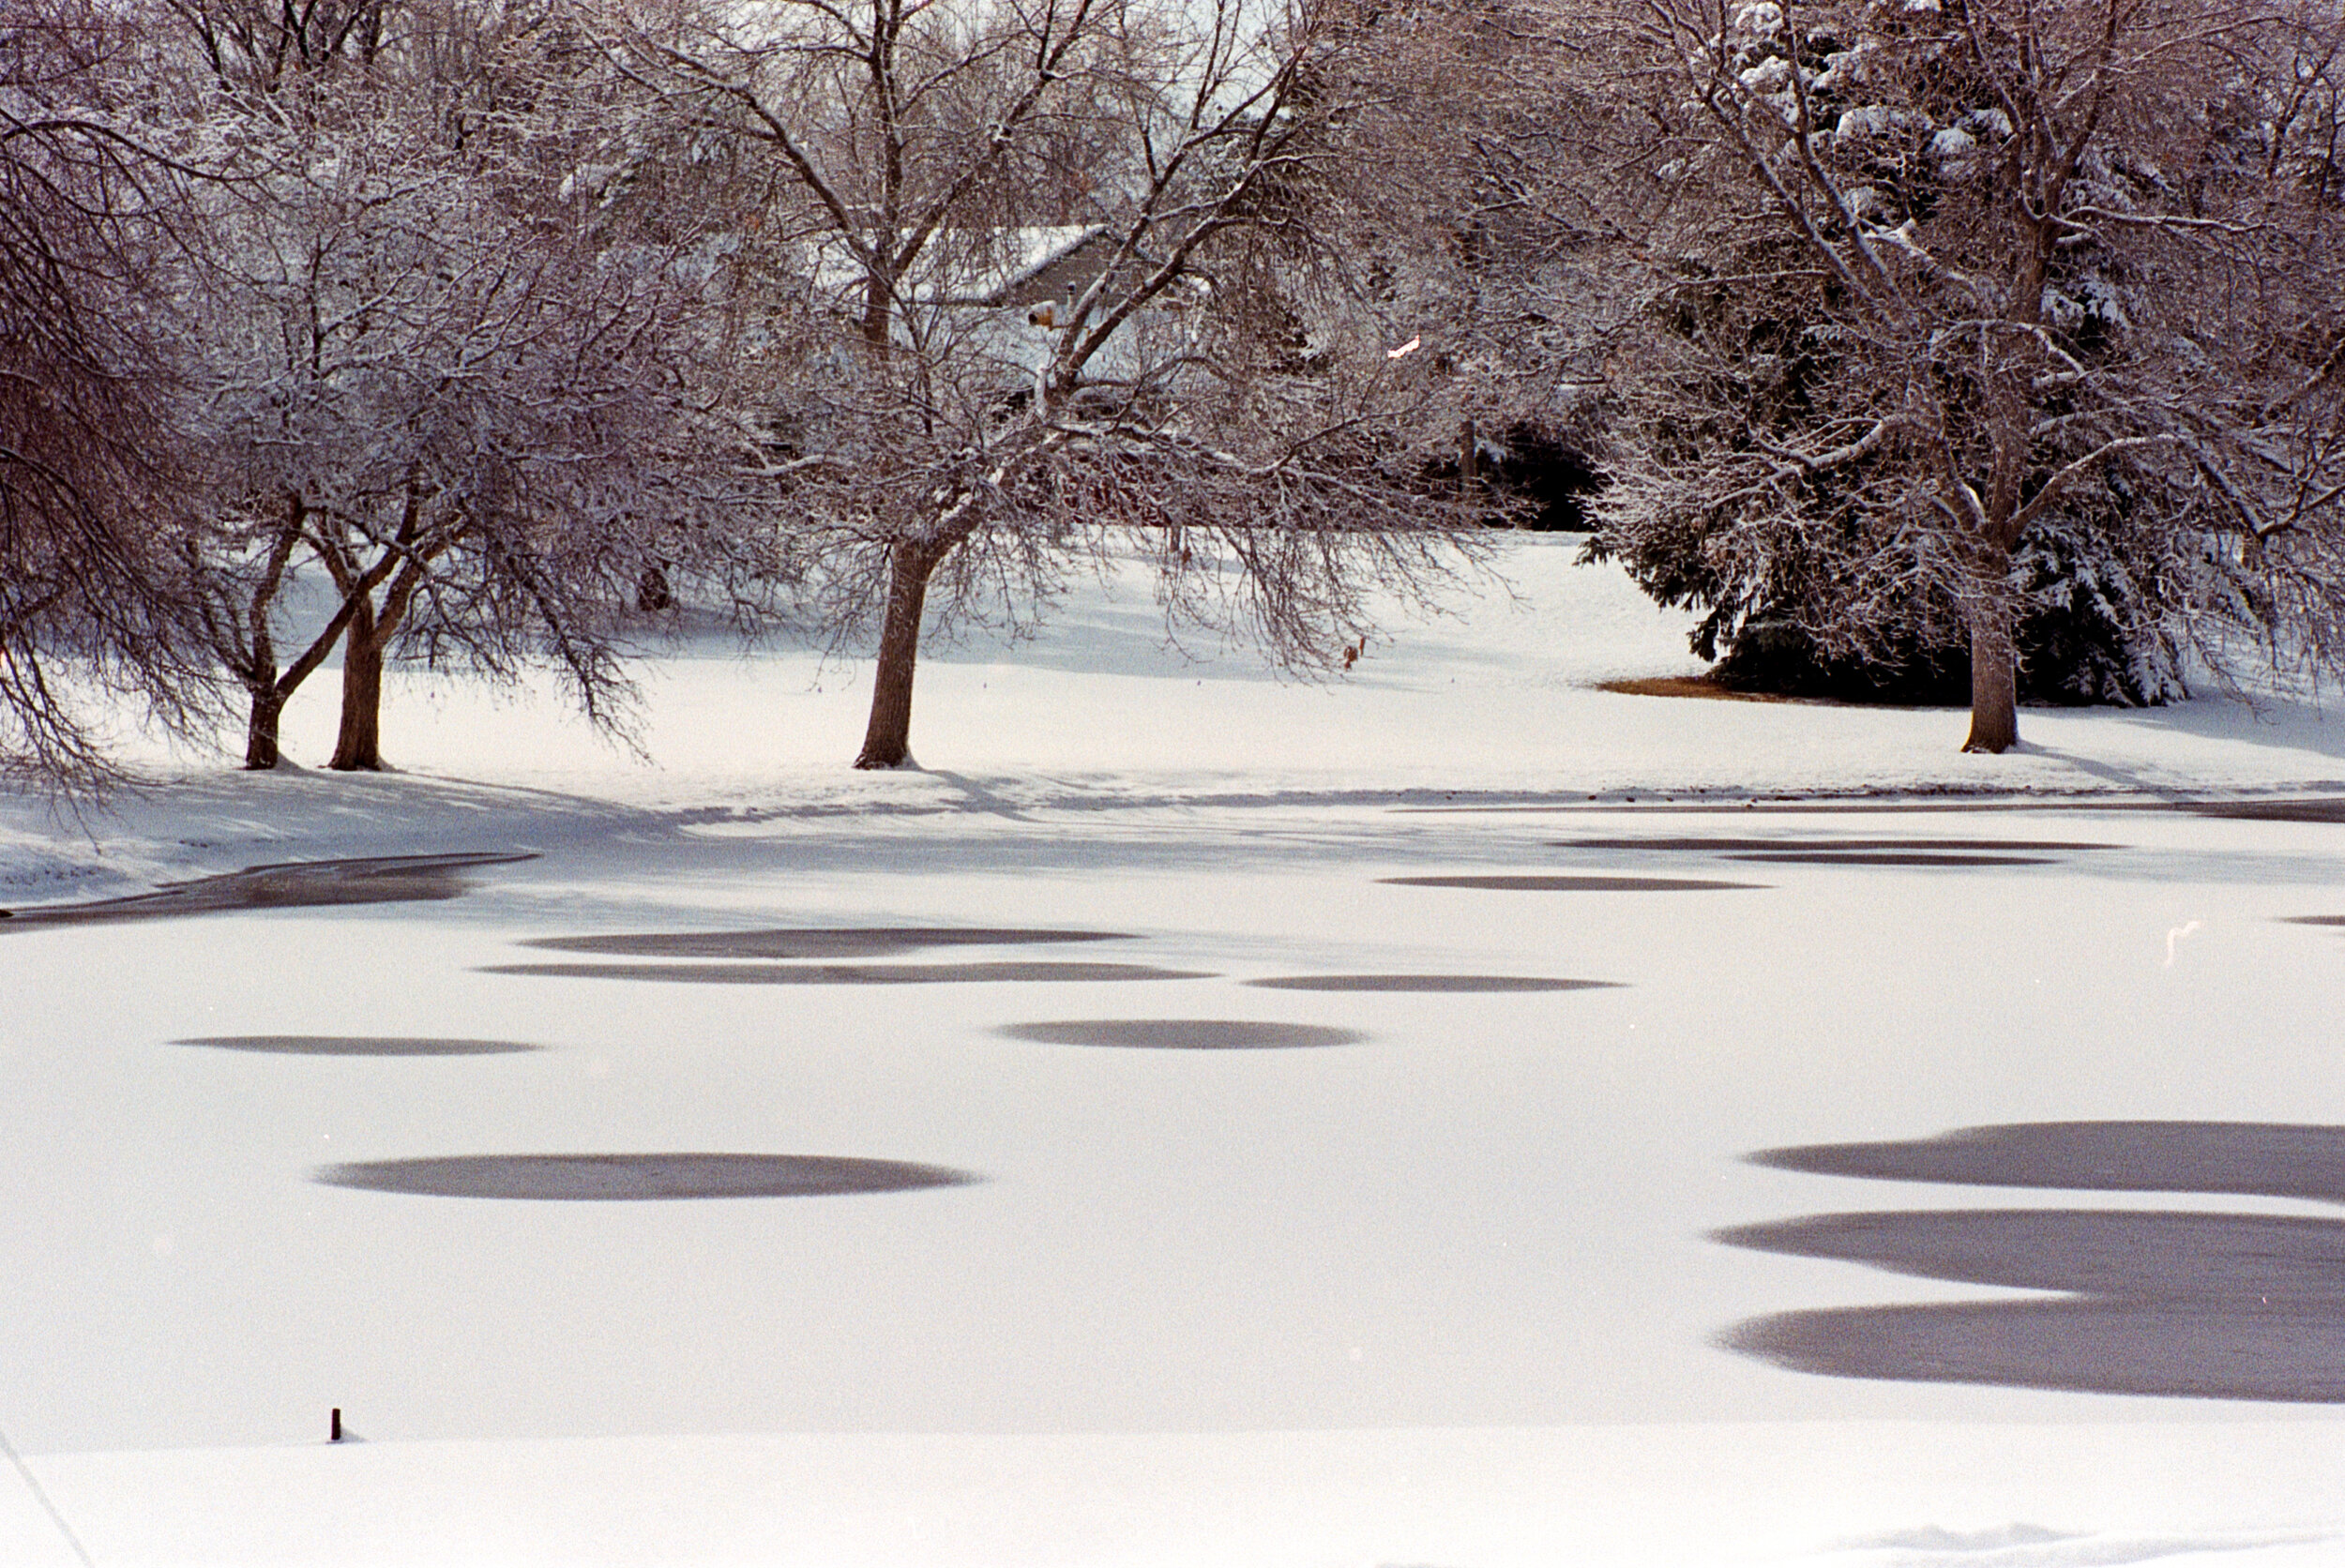 The pond and its winter coat